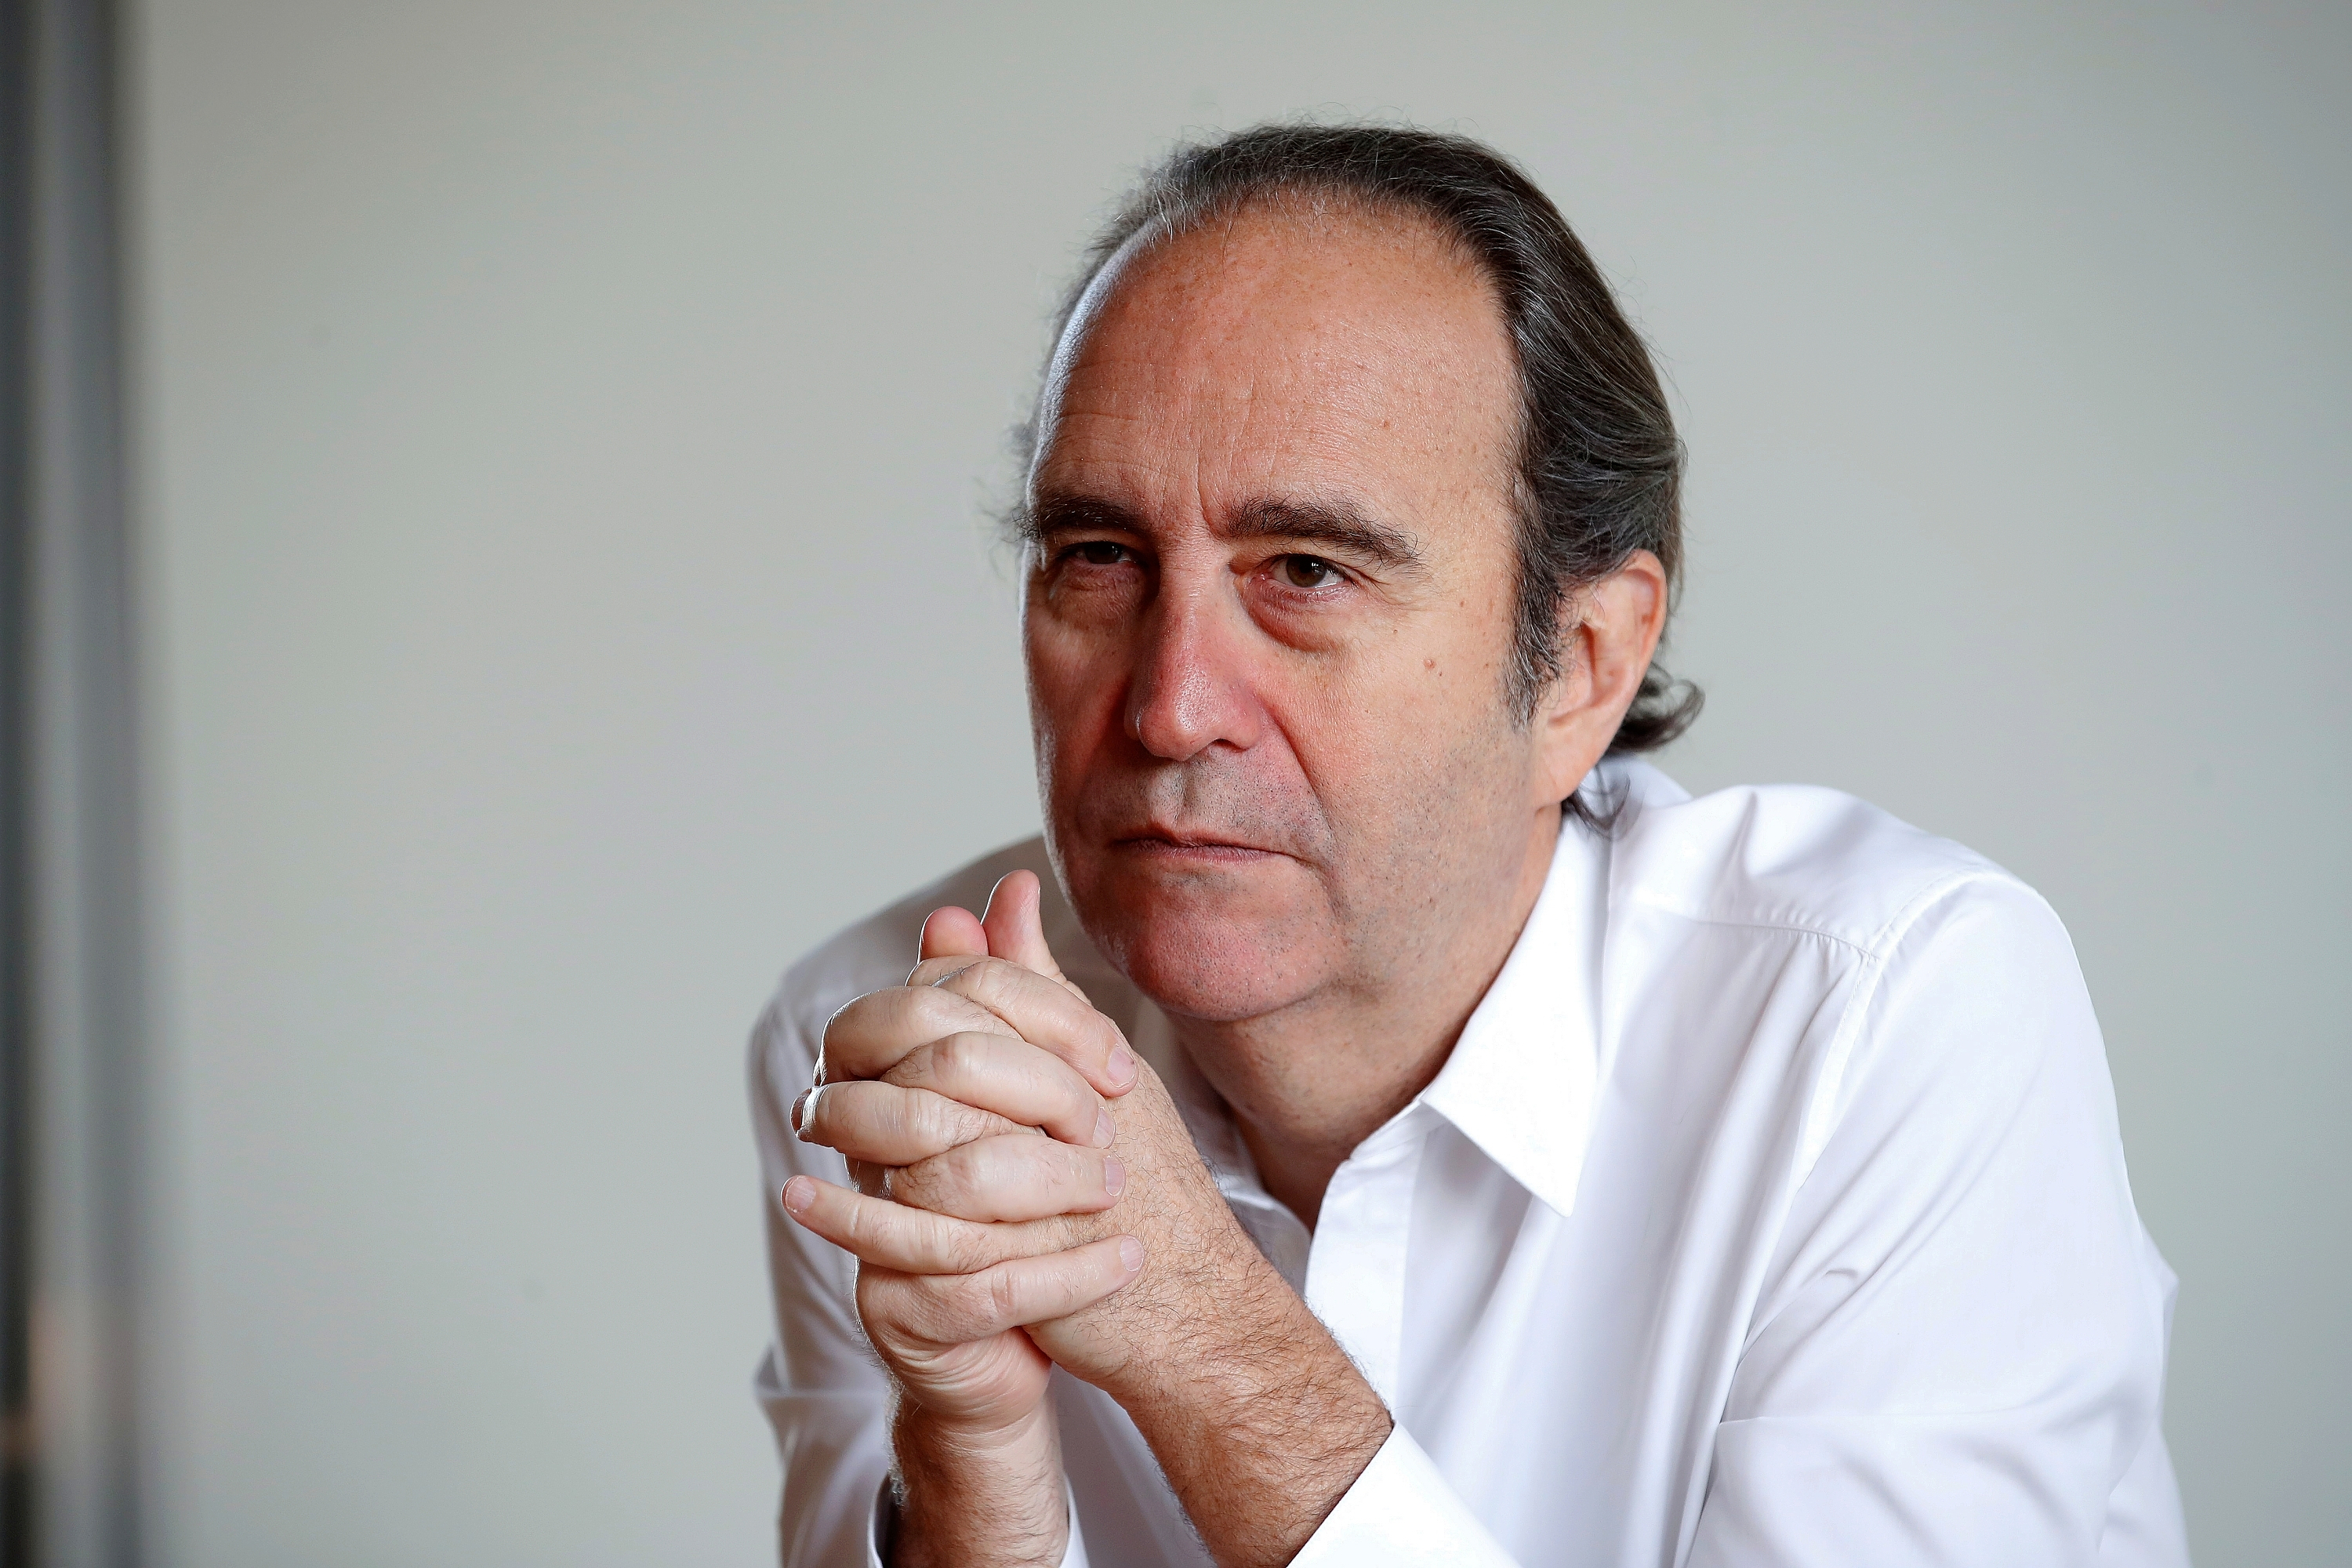 Xavier Niel finalizes the sale of his shares in the Le Monde group to an independent fund